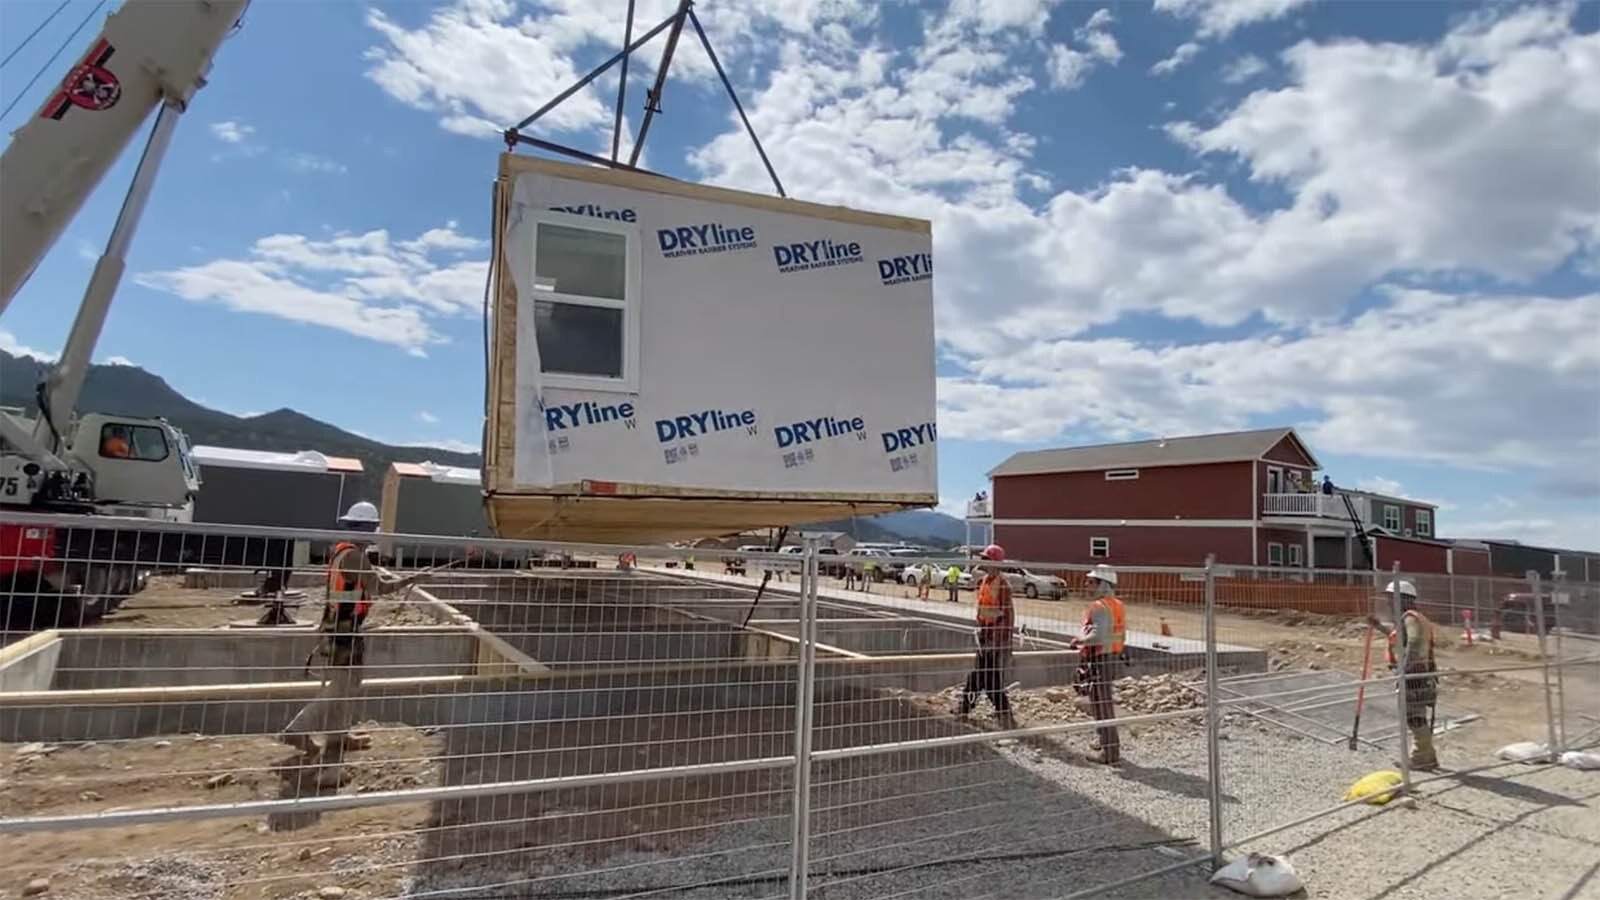 A still shot from a Fading West video showing a modular housing unit being placed on a pad.